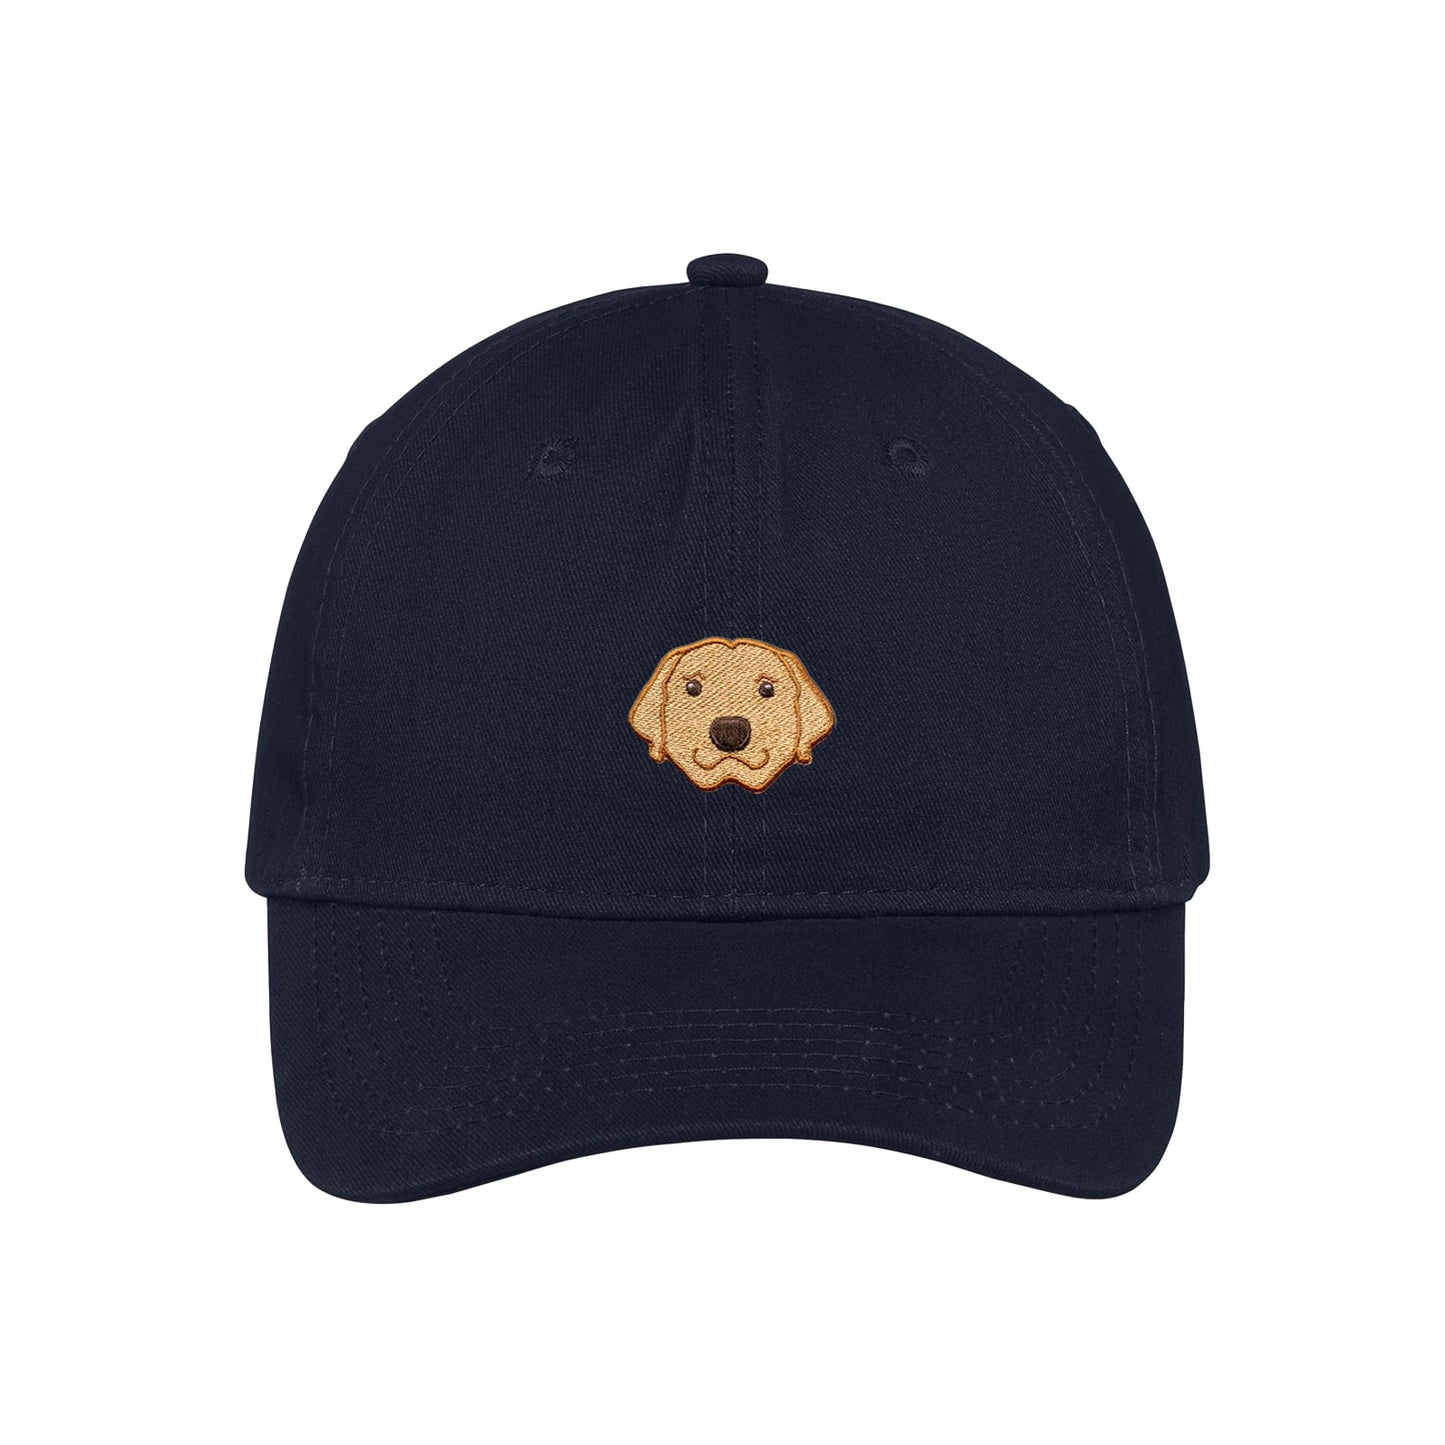 Navy custom dog dad hats customized with your dog's face embroidered on the front.